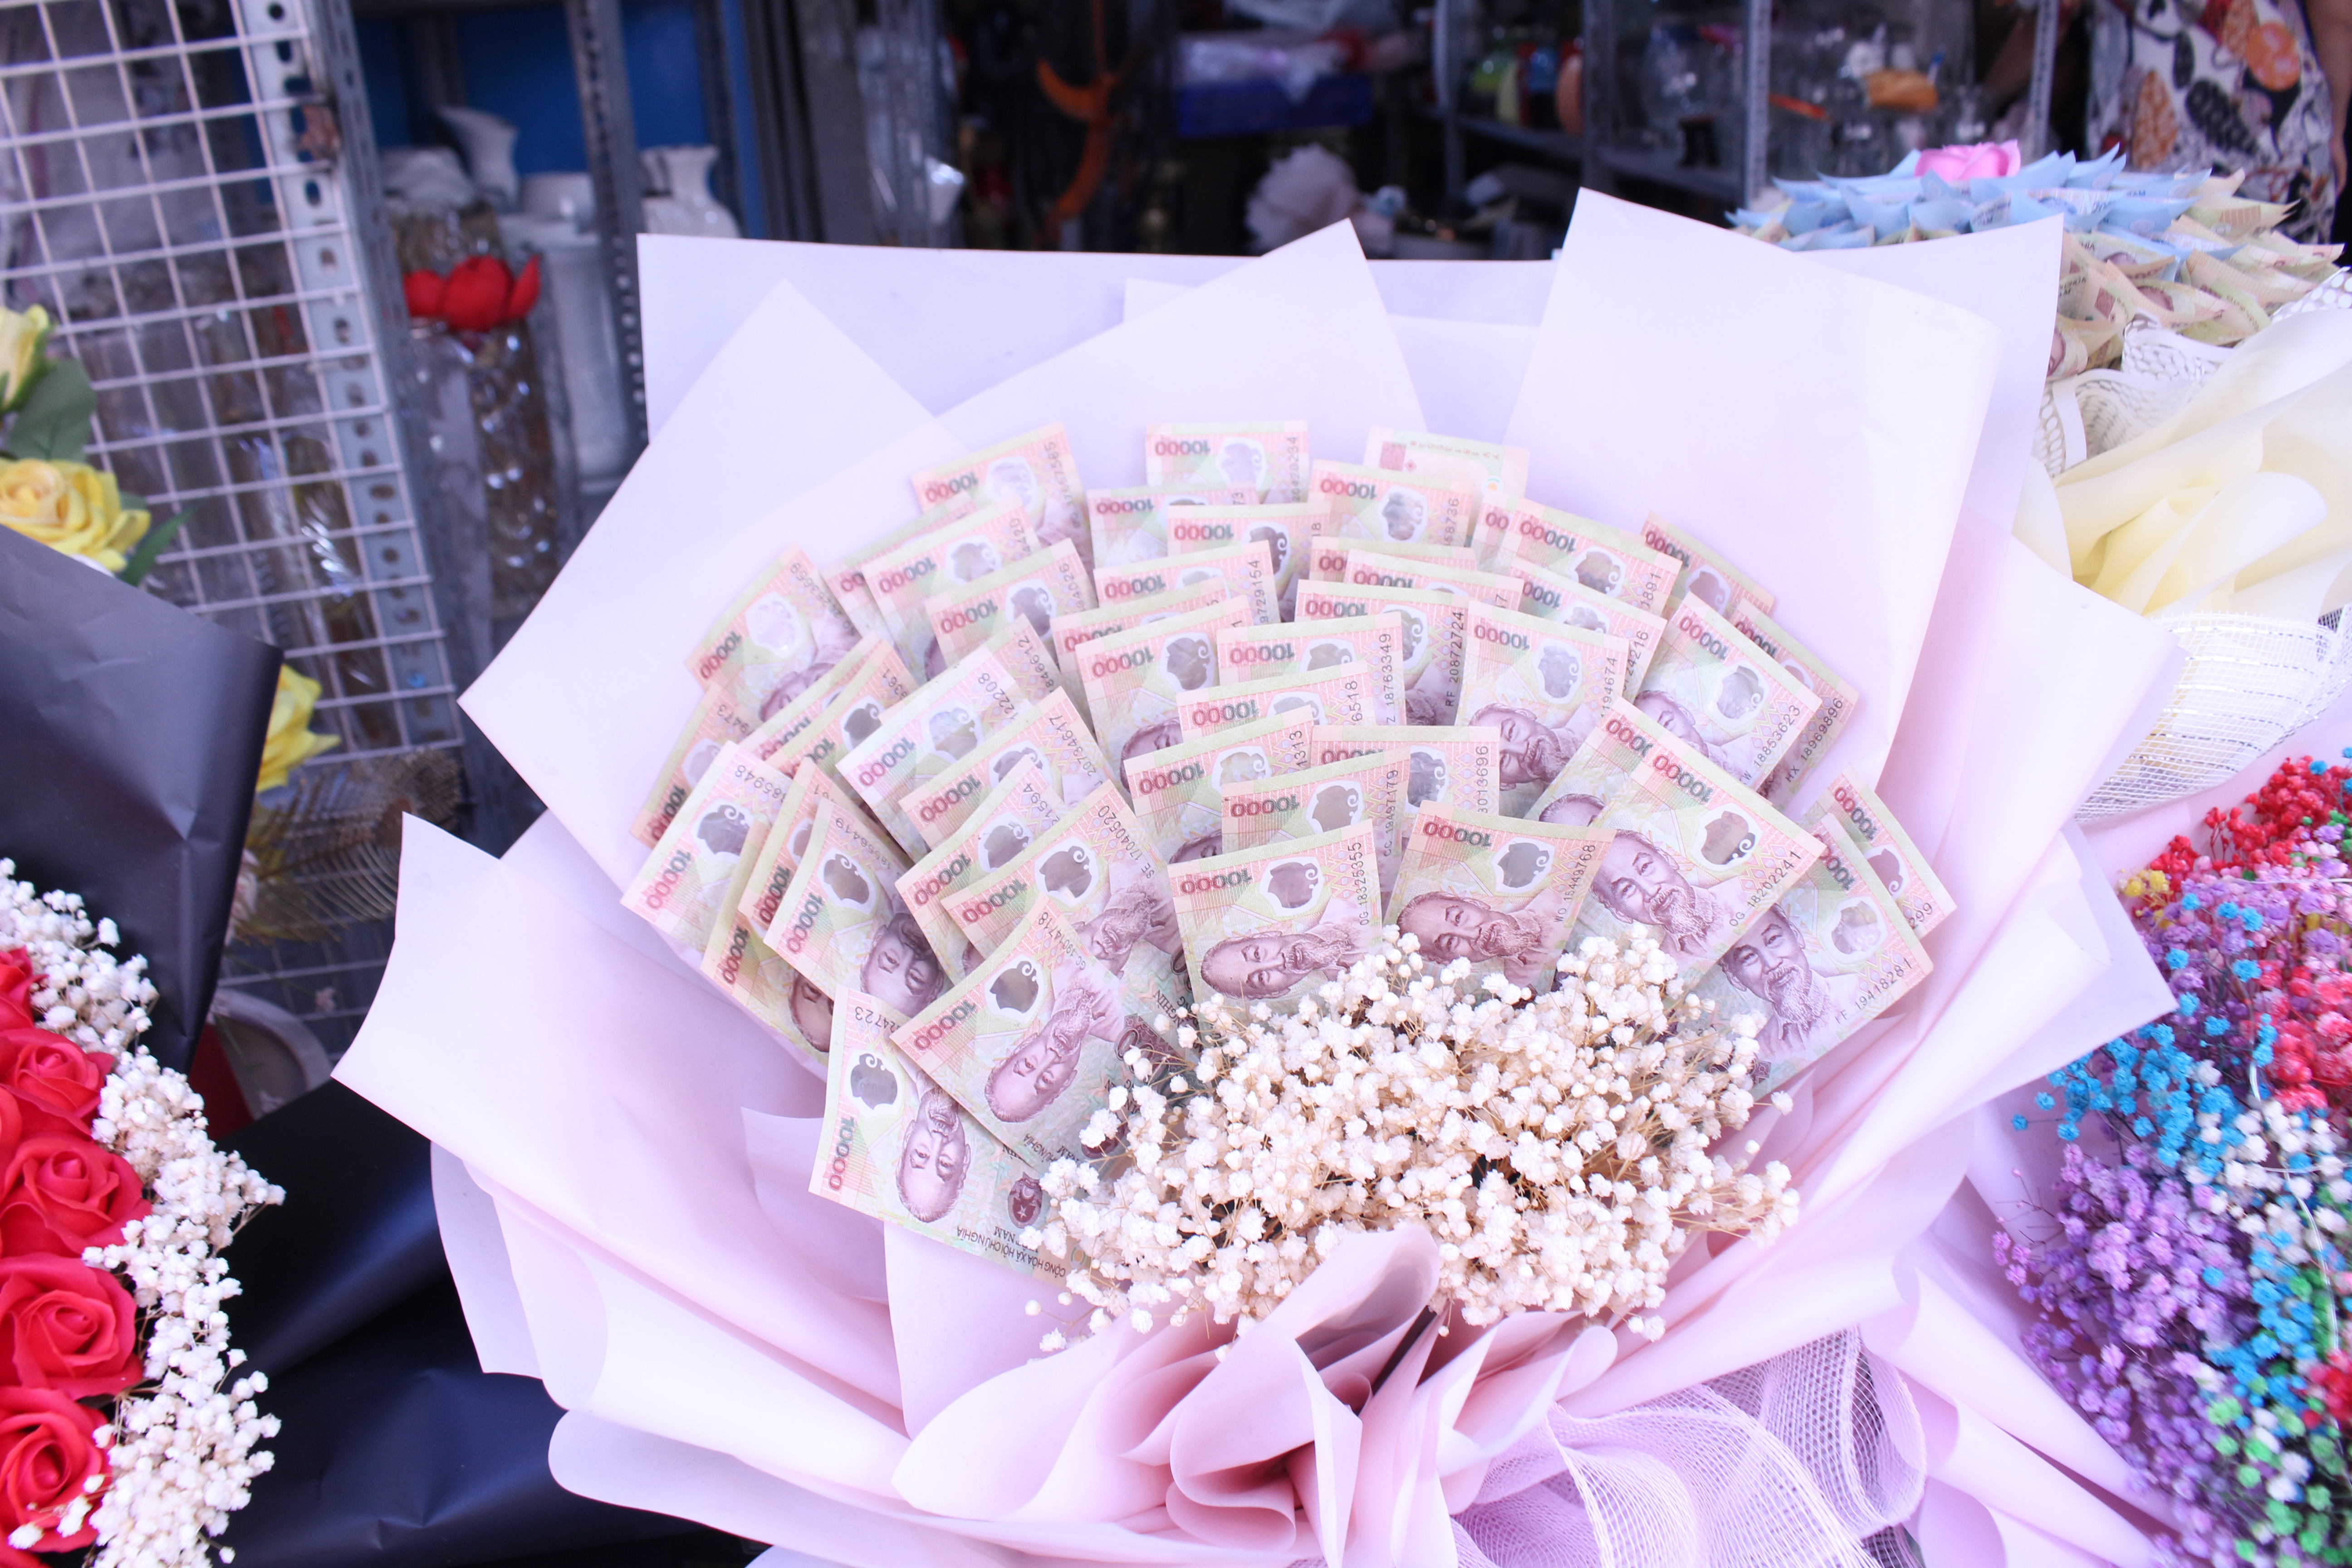 A bouquet made of money sheets is sold at Ho Thi Ky Market in District 10, Ho Chi Minh City. Photo: Ray Kuschert / Tuoi Tre News